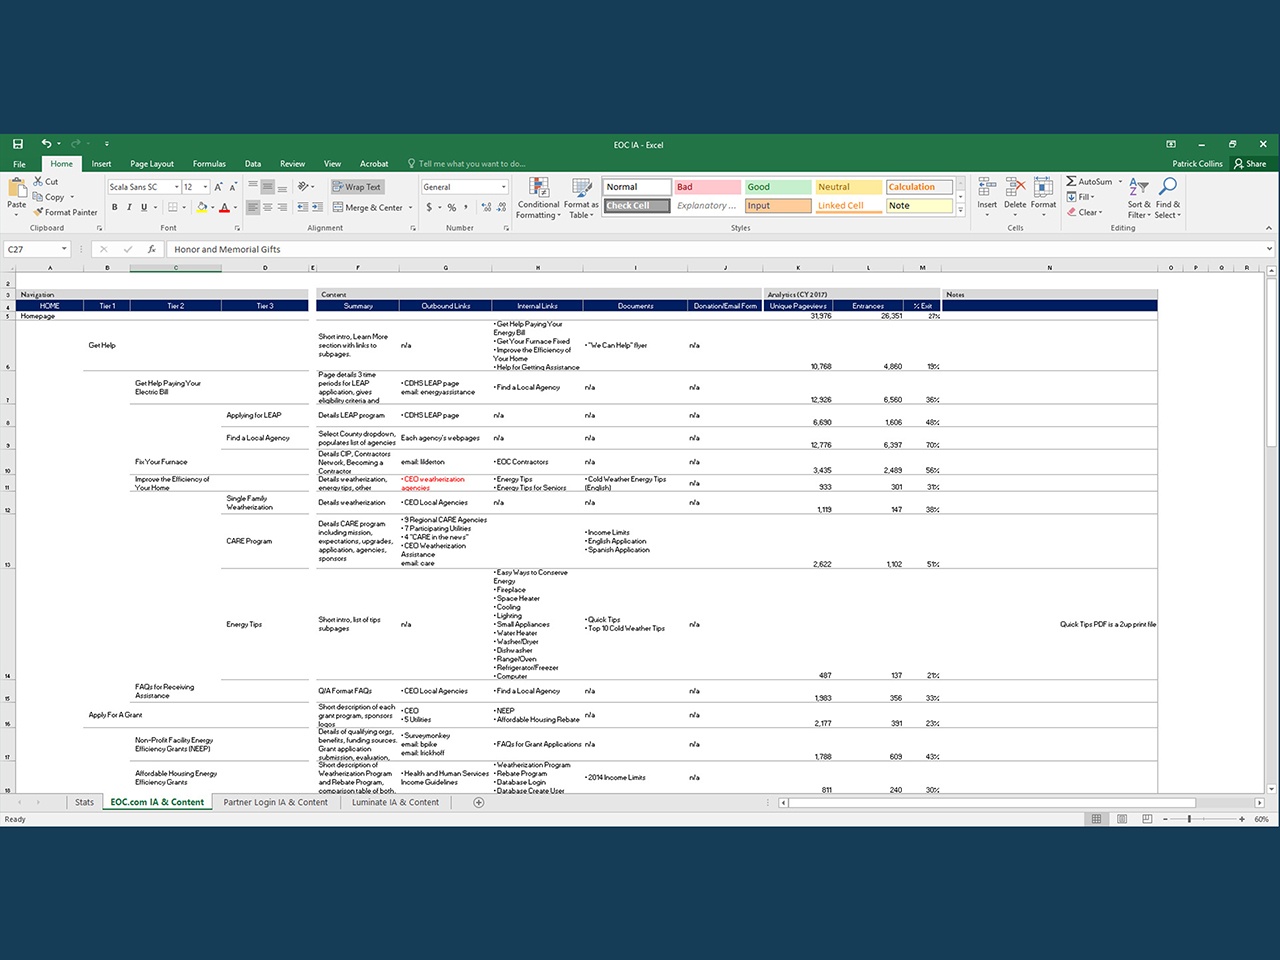 Spreadsheet showing information architecture of website